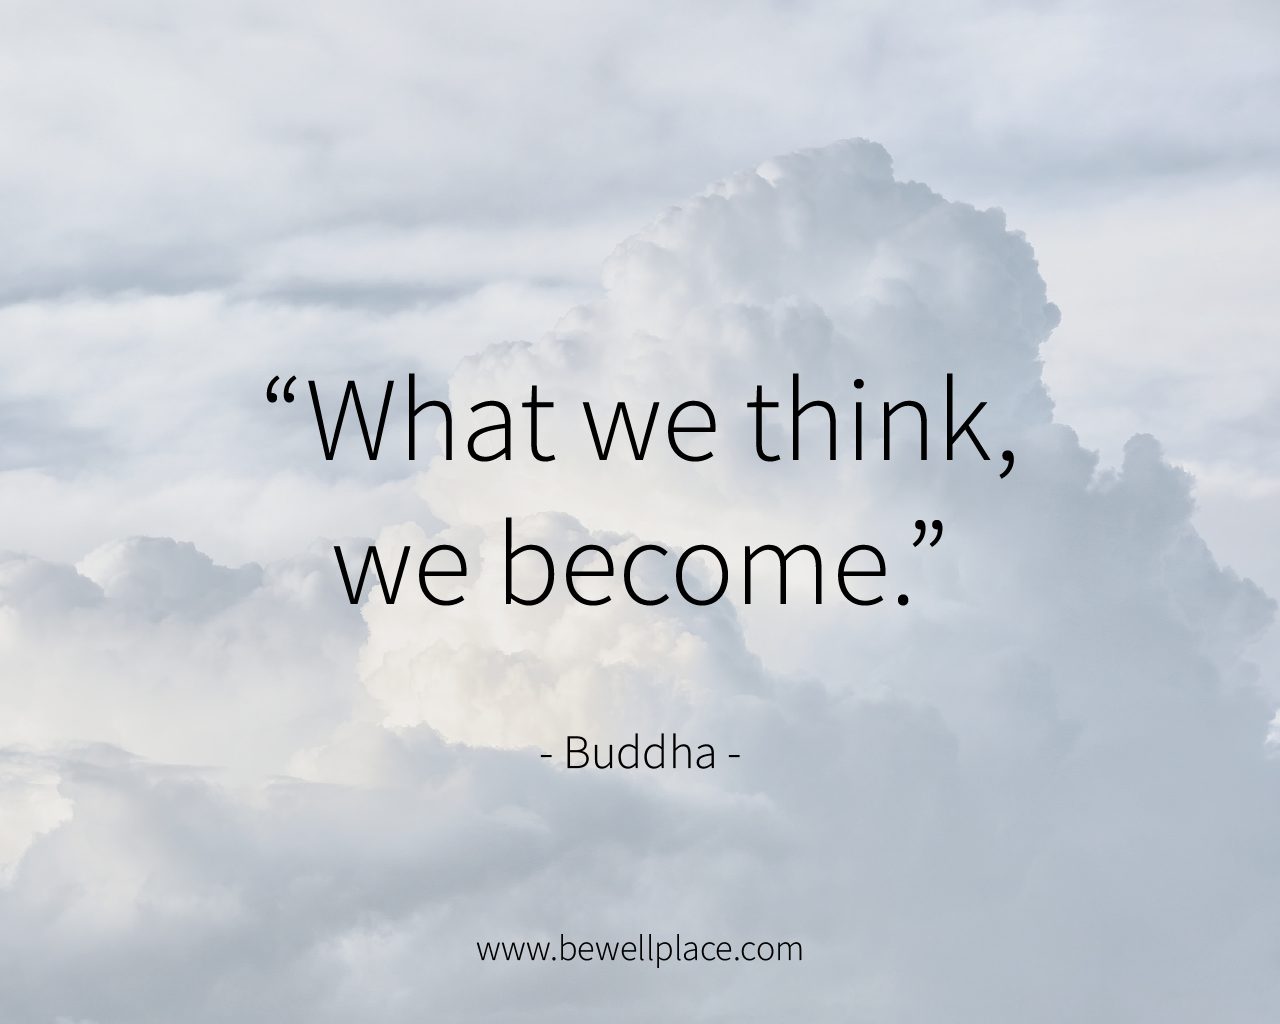 What we think, we become. - Buddha